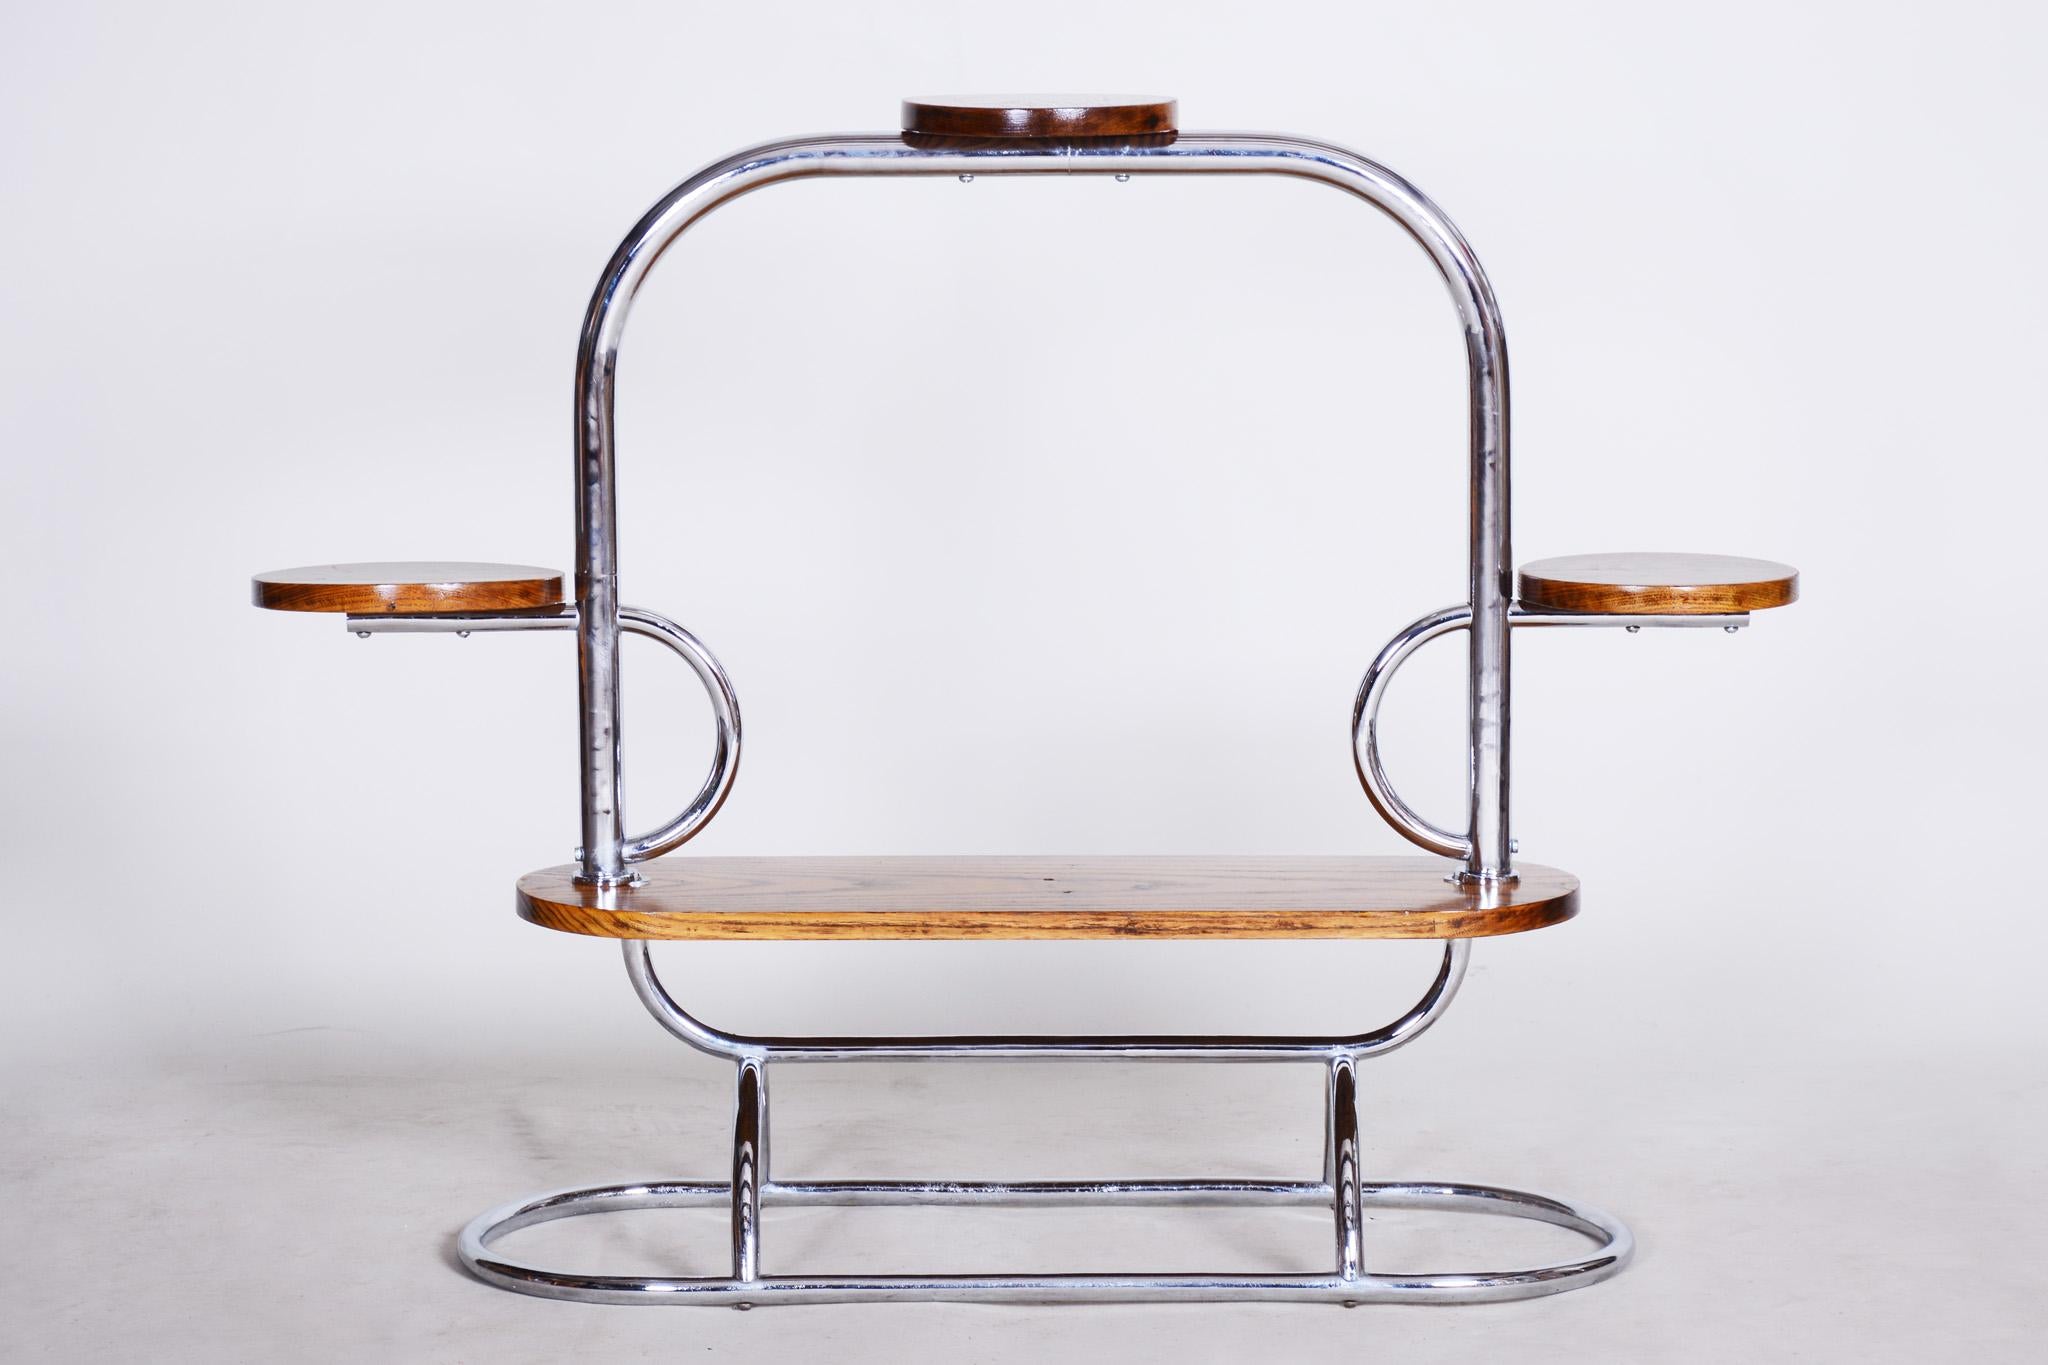 This flower stand with a frame of bent steel tube and lacquered oak shelves, was made in the 1930s in the Czech Republic. Original chromium plating in perfect original condition.

Source: Czechia
Period: 1930-1939.